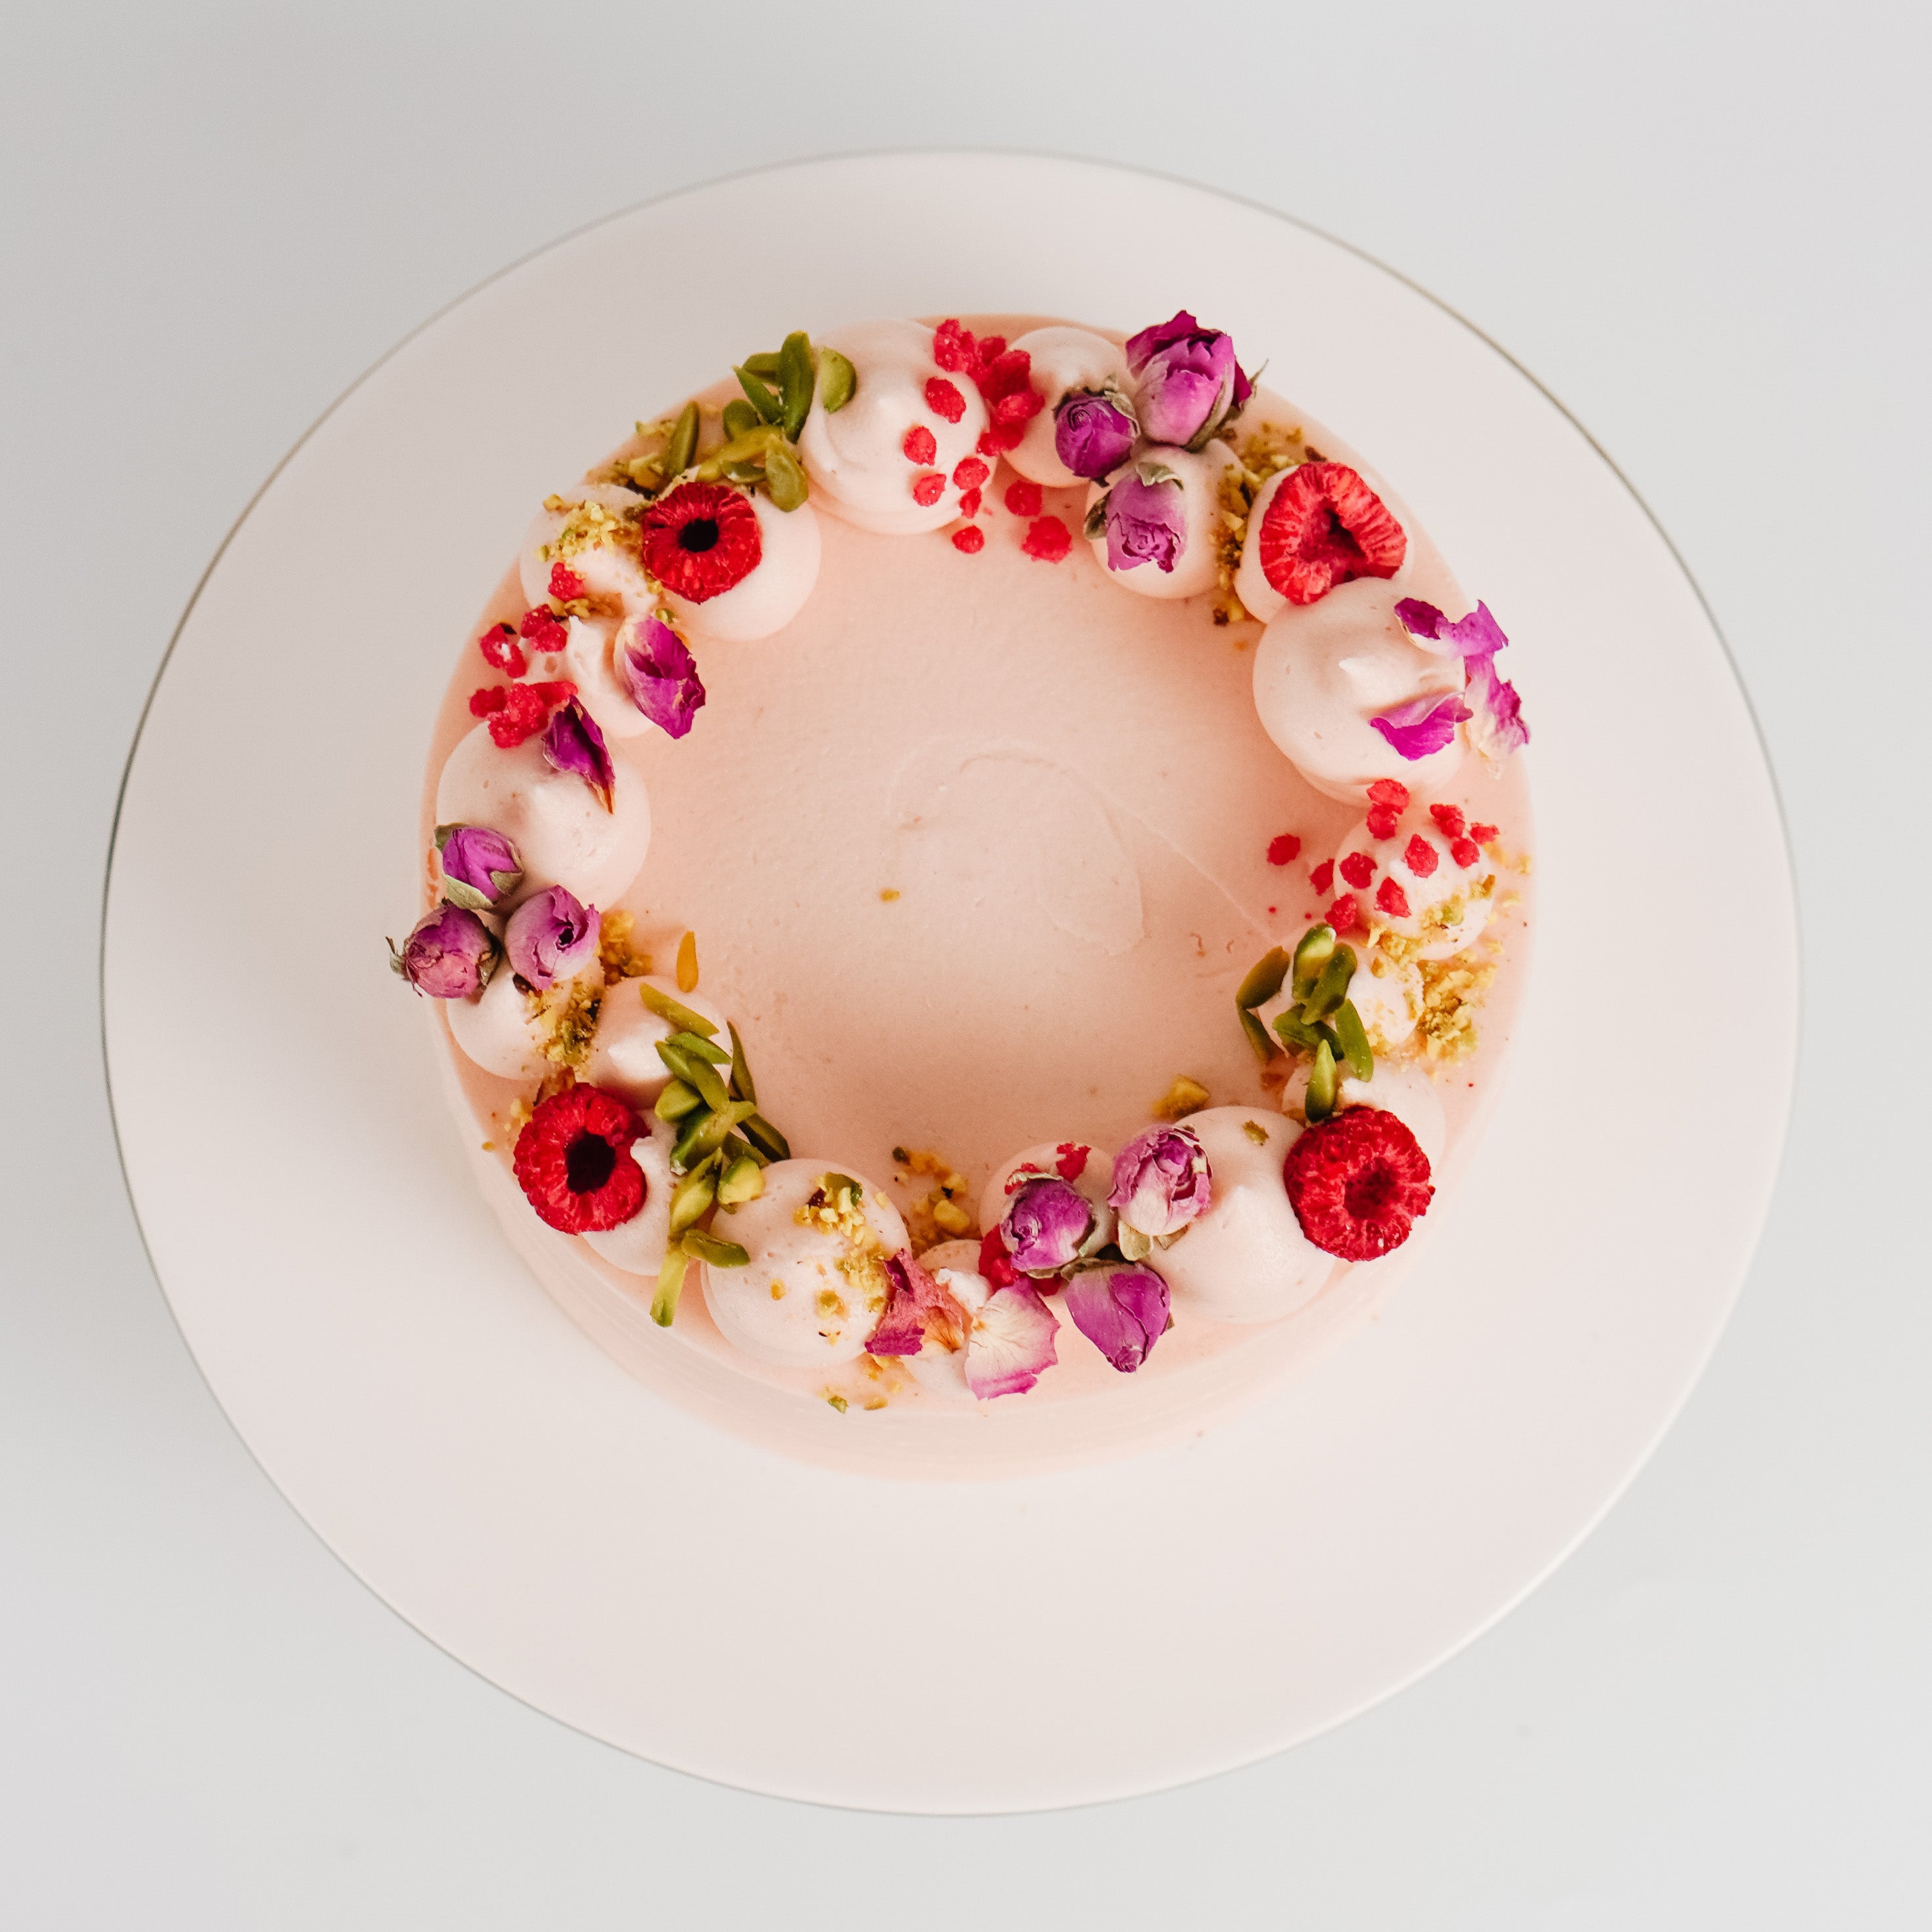 Rose, Raspberry & Pistachio - for Two